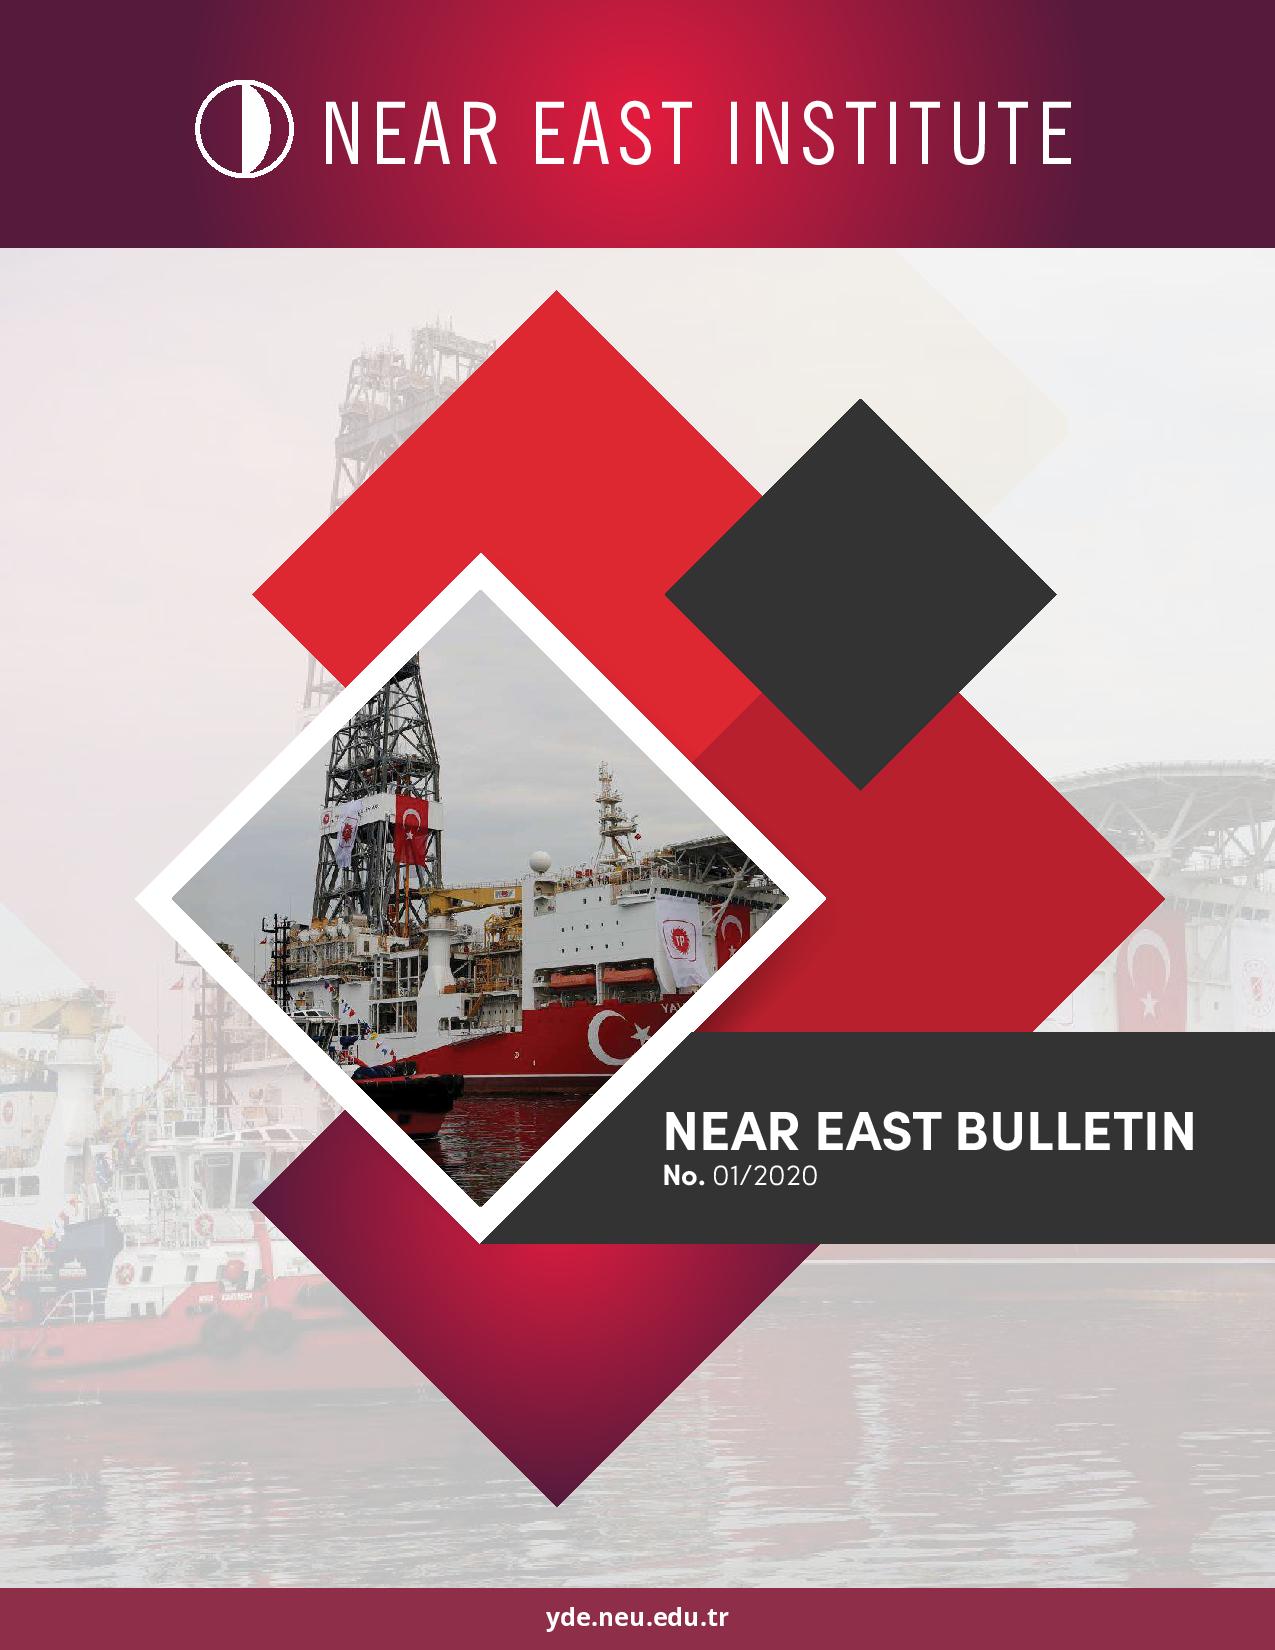 Prepared by Near East Institute, the First Issue of the Near East Bulletin, which contains Scientific Policies in the Political, Social, Economic and Cultural Processes, was published